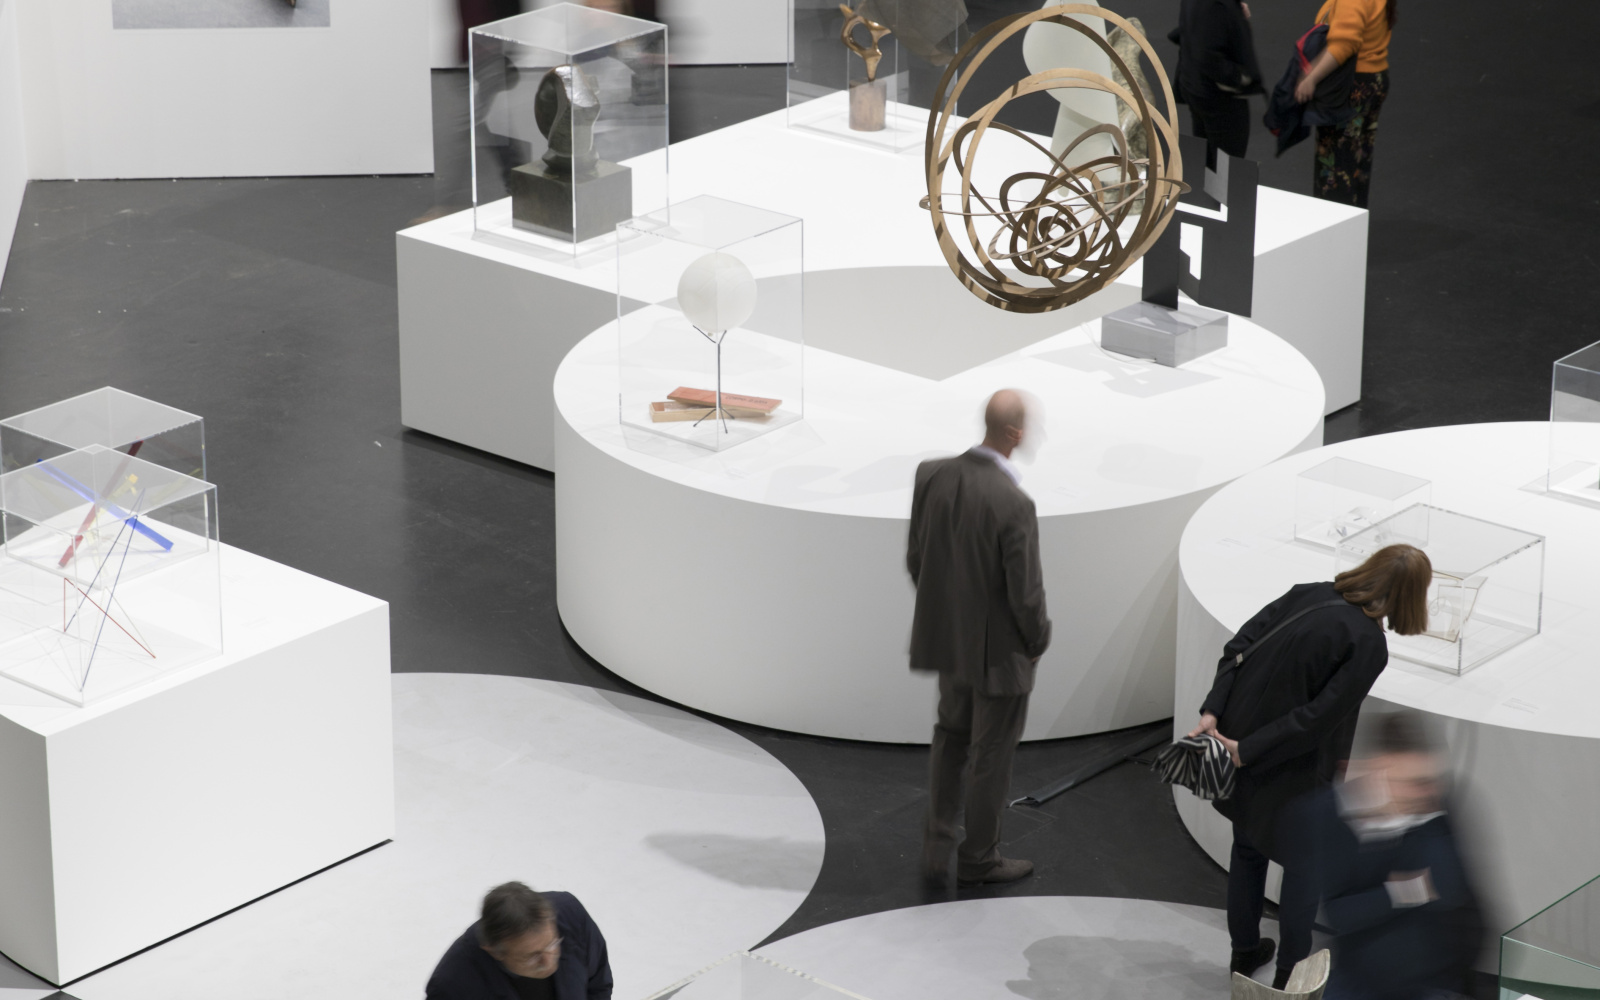 Sculptures stand on white pedestals, visitors are on their way in between.